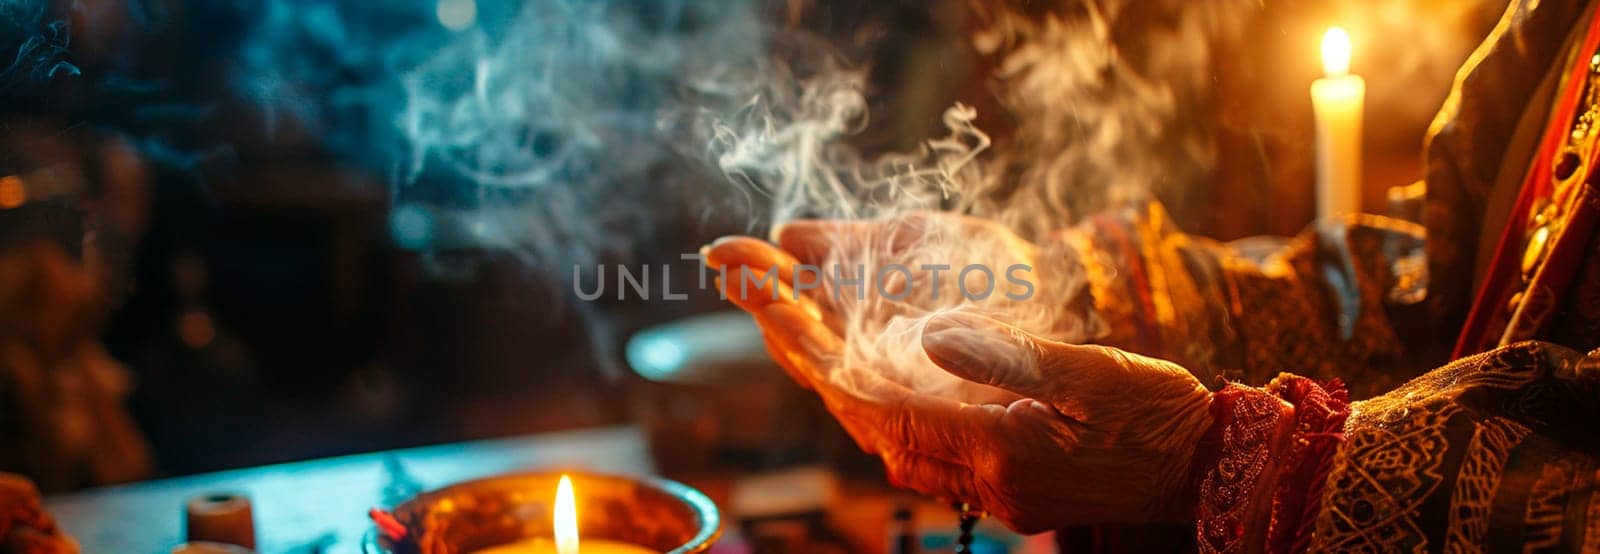 Fortune teller tells fortunes with candles and smoke. Selective focus. People.